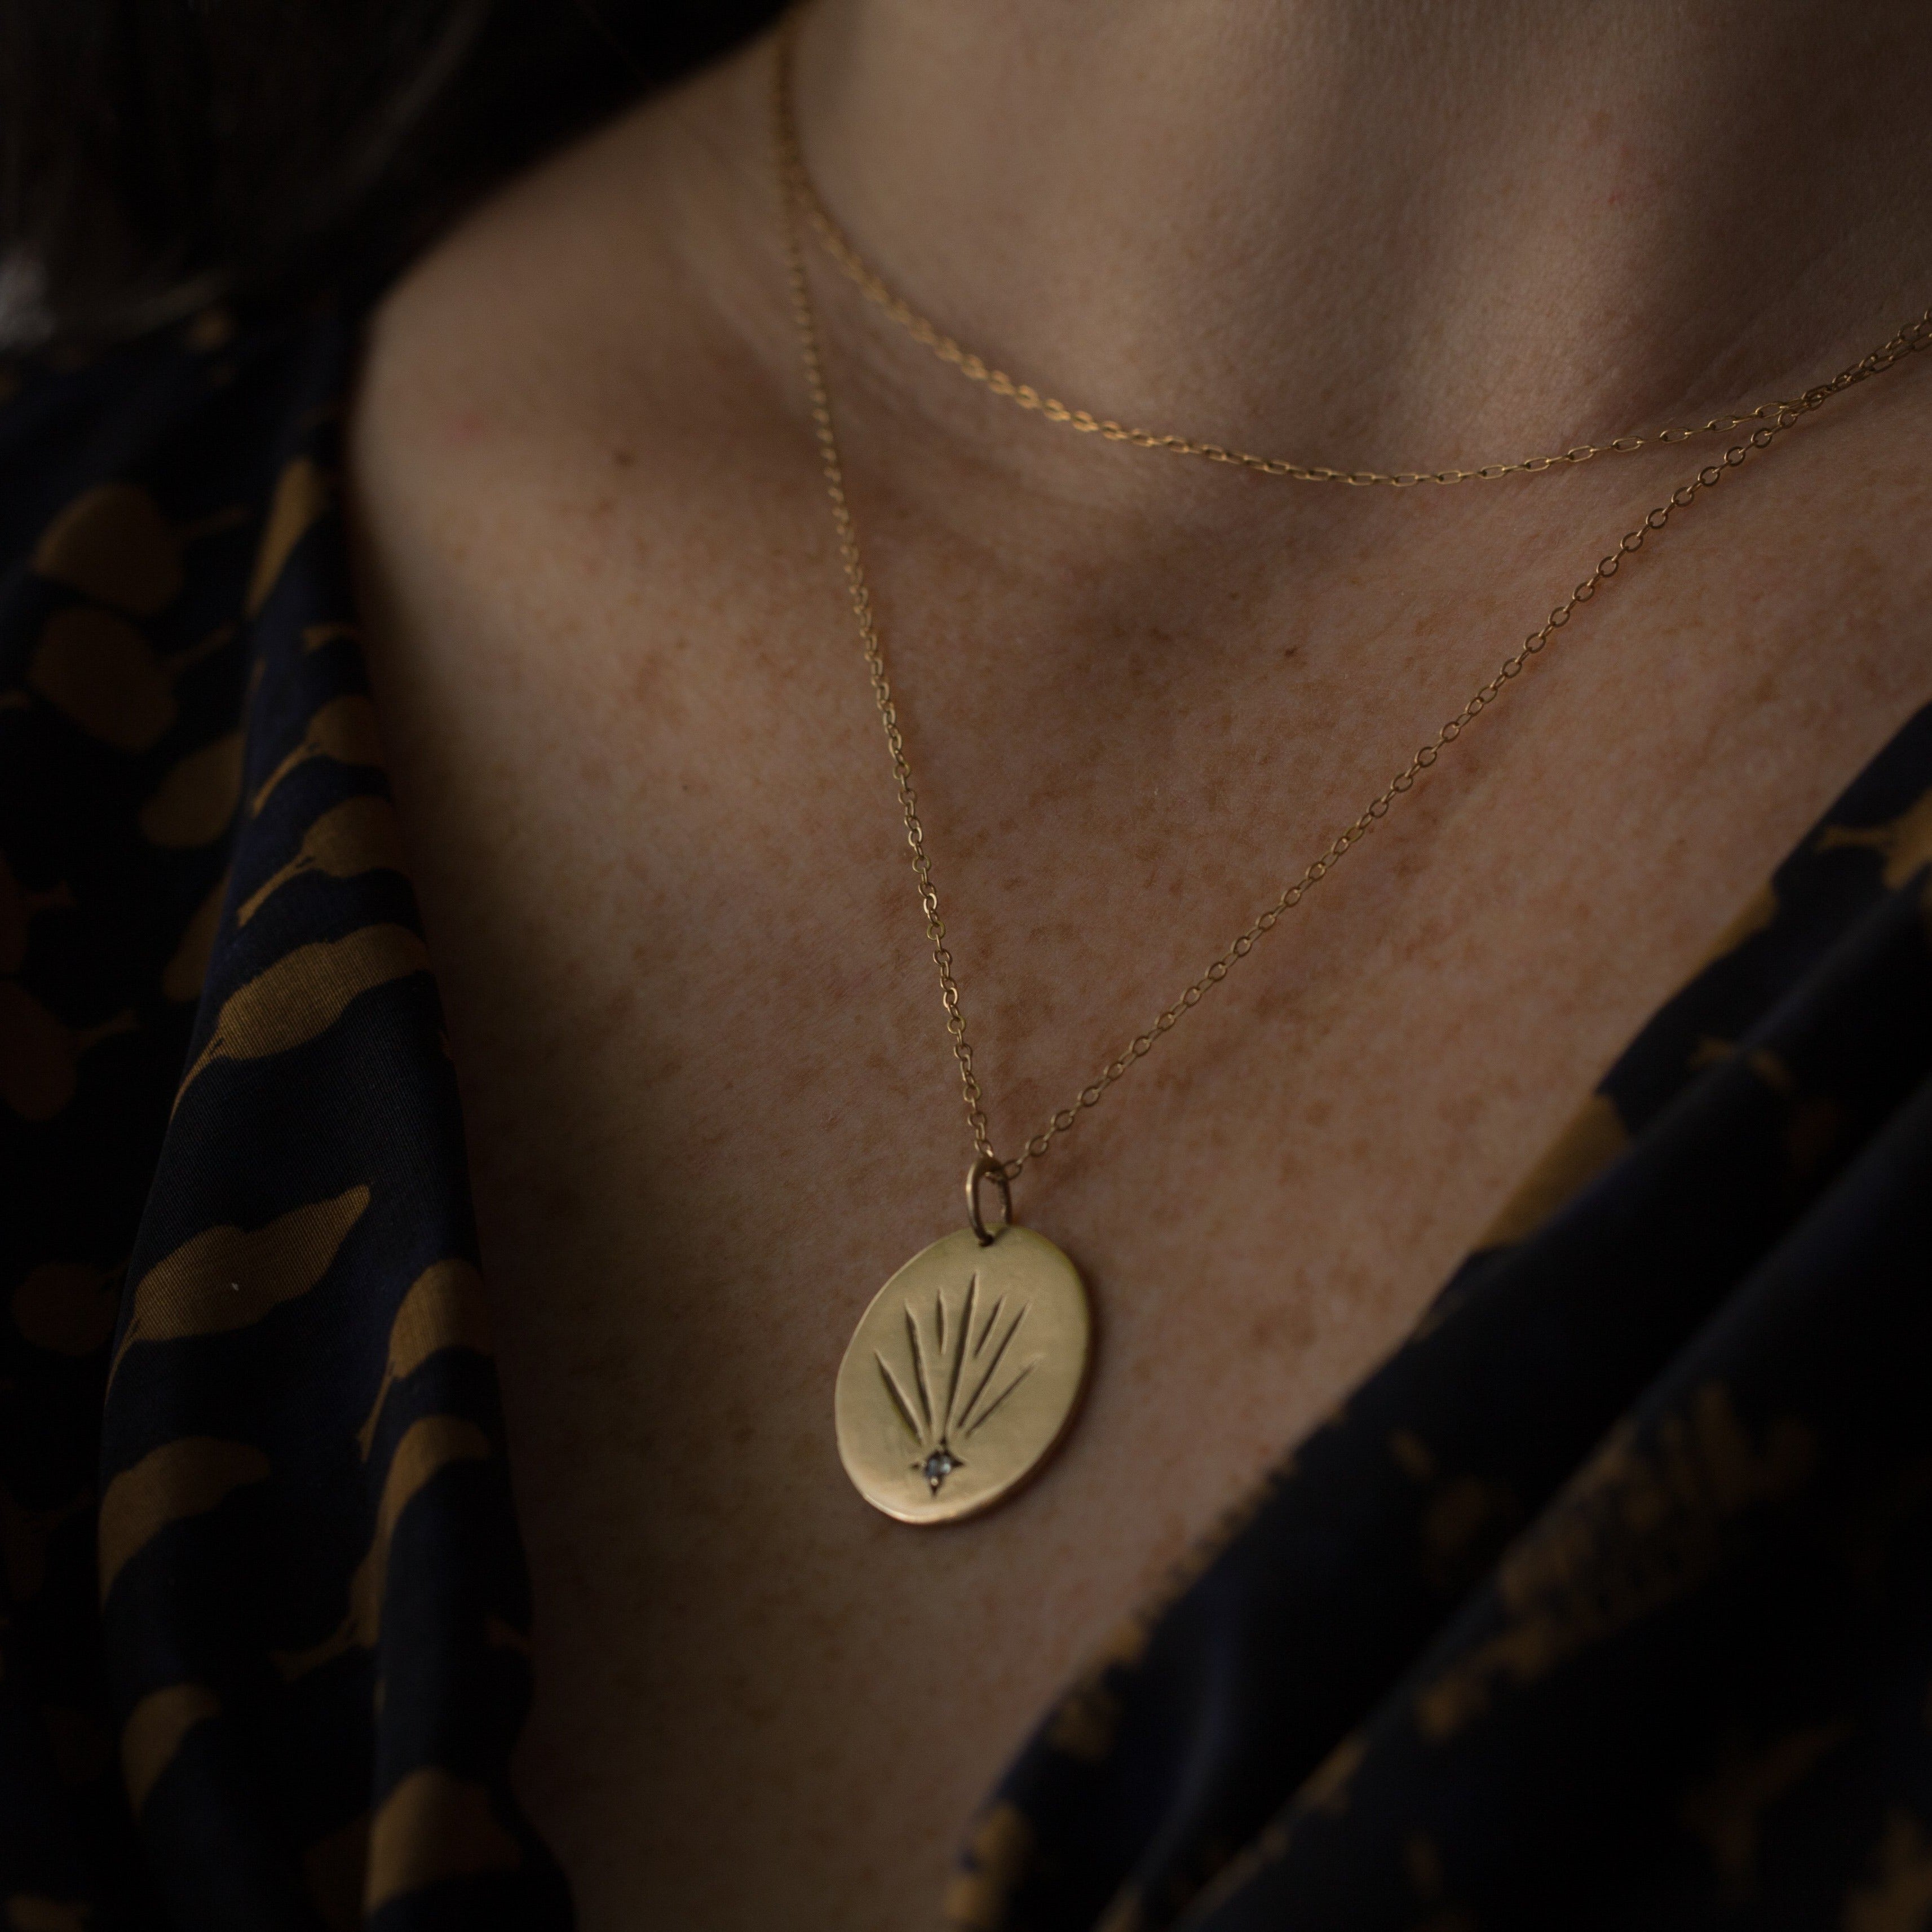 holiday gift ideas, manifestor necklace, manifesting, manifestation, solid 14k gold necklace, pendant necklace, gold chain, 12th house jewelry, wear with love, ethically sourced, kelly star lannen, handmade in NYC